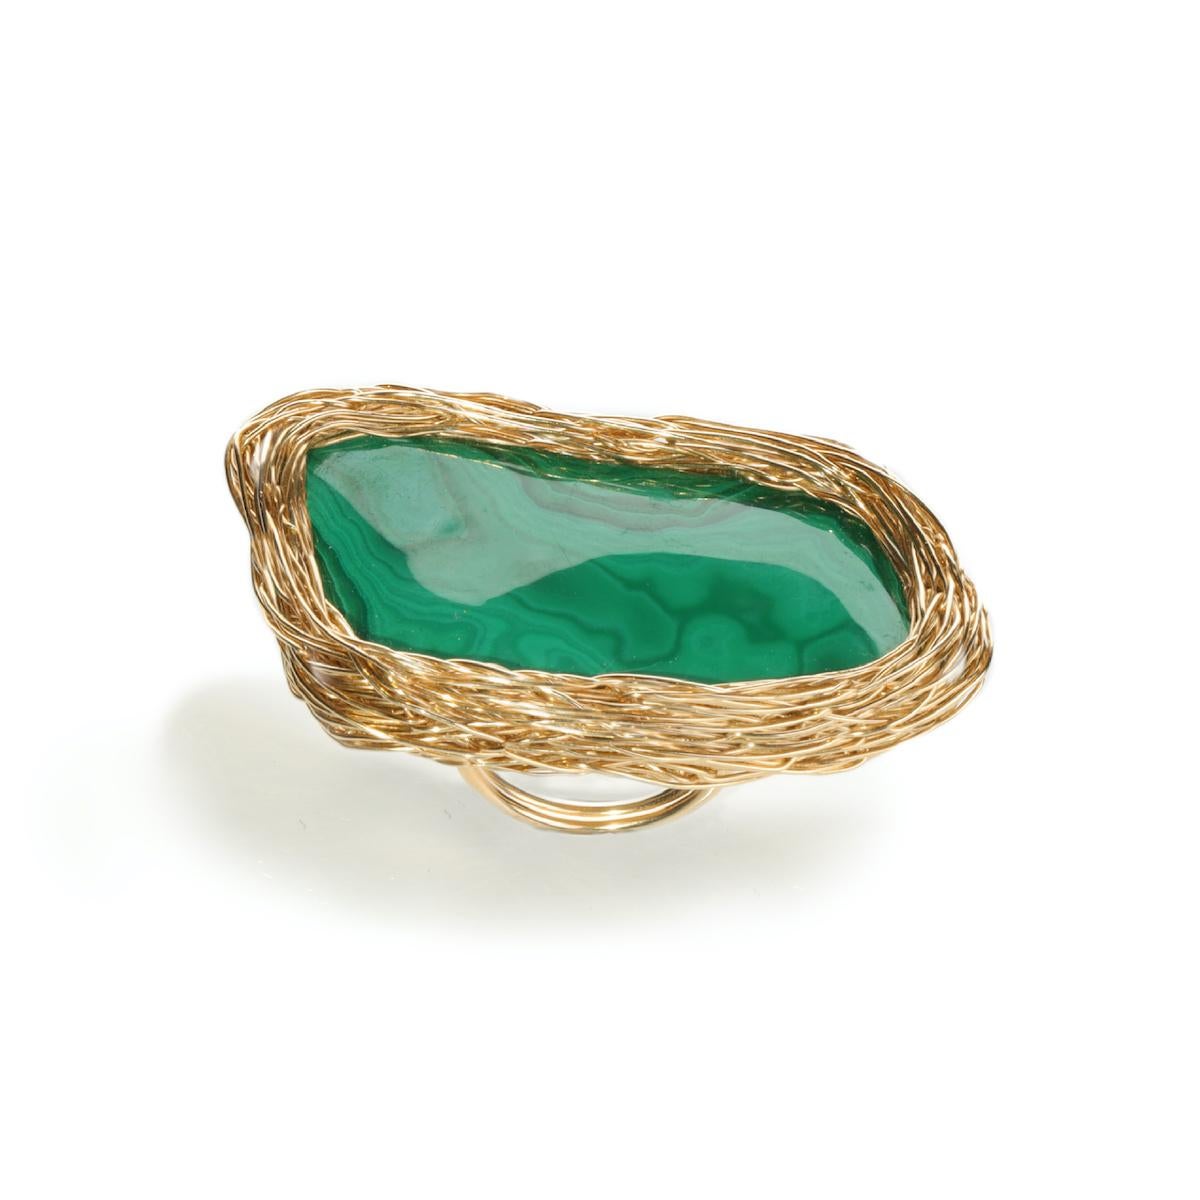 Malachite Statement Cocktail Ring 14 K in Yellow Gold F. by the Artist herself For Sale 2